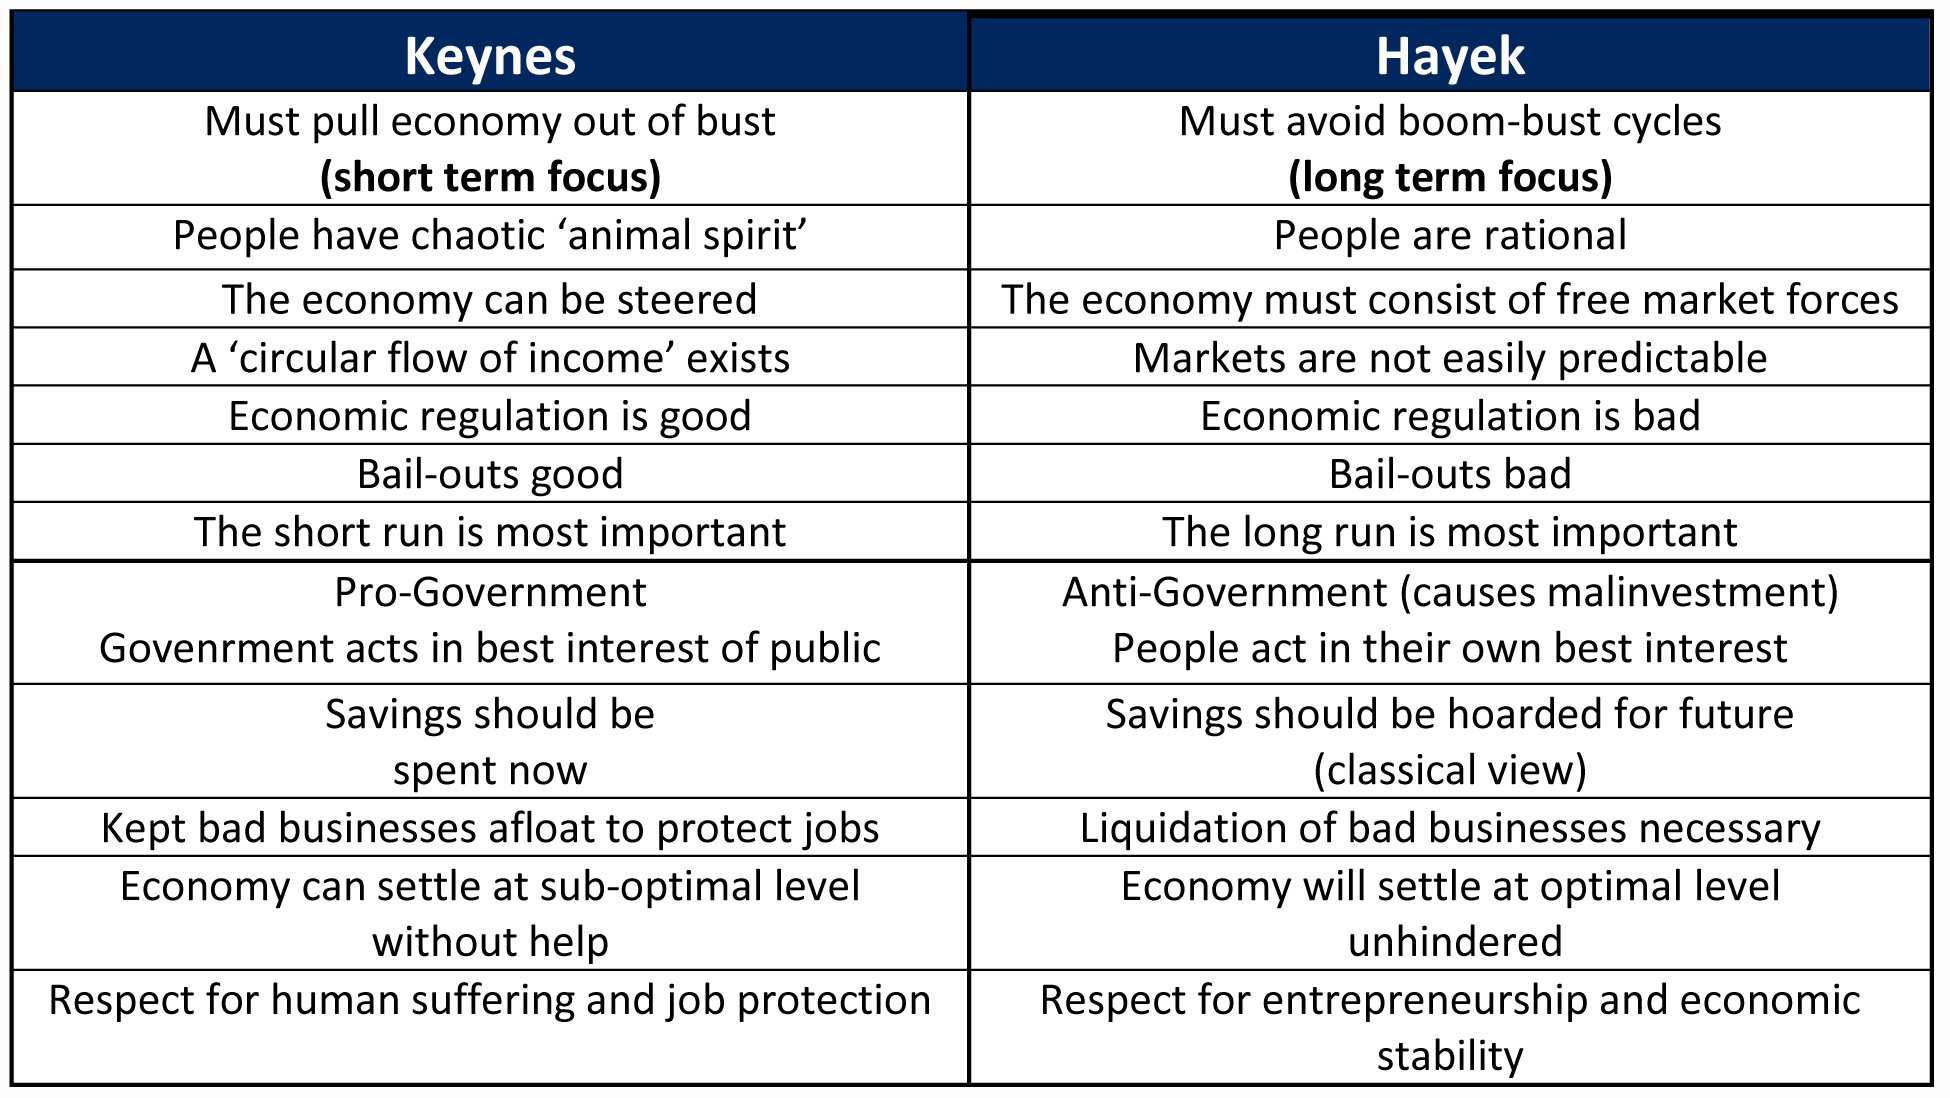 Keynes Must pull economy out of bust (short term focus) People have
chaotic 'animal spirit' The economy can be steered A 'circular flow of
income' exists Economic regulation is good Bail-outs good The short
run is most important Pro-Government Govenrment acts in best interest
of public Savings should be spent now Kept bad businesses afloat to
protect jobs Economy can settle at sub-optimal level without help
Respect for human suffering and job protection Hayek Must avoid
boom-bust cycles (long term focus) People are rational The economy
must consist of free market forces Markets are not easily predictable
Economic regulation is bad Bail-outs bad The long run is most
important Anti-Government (causes malinvestment) People act in their
own best interest Savings should be hoarded for future (classical
view) Liquidation of bad businesses necessary Economy will settle at
optimal level unhindered Respect for entrepreneurship and economic
stability 